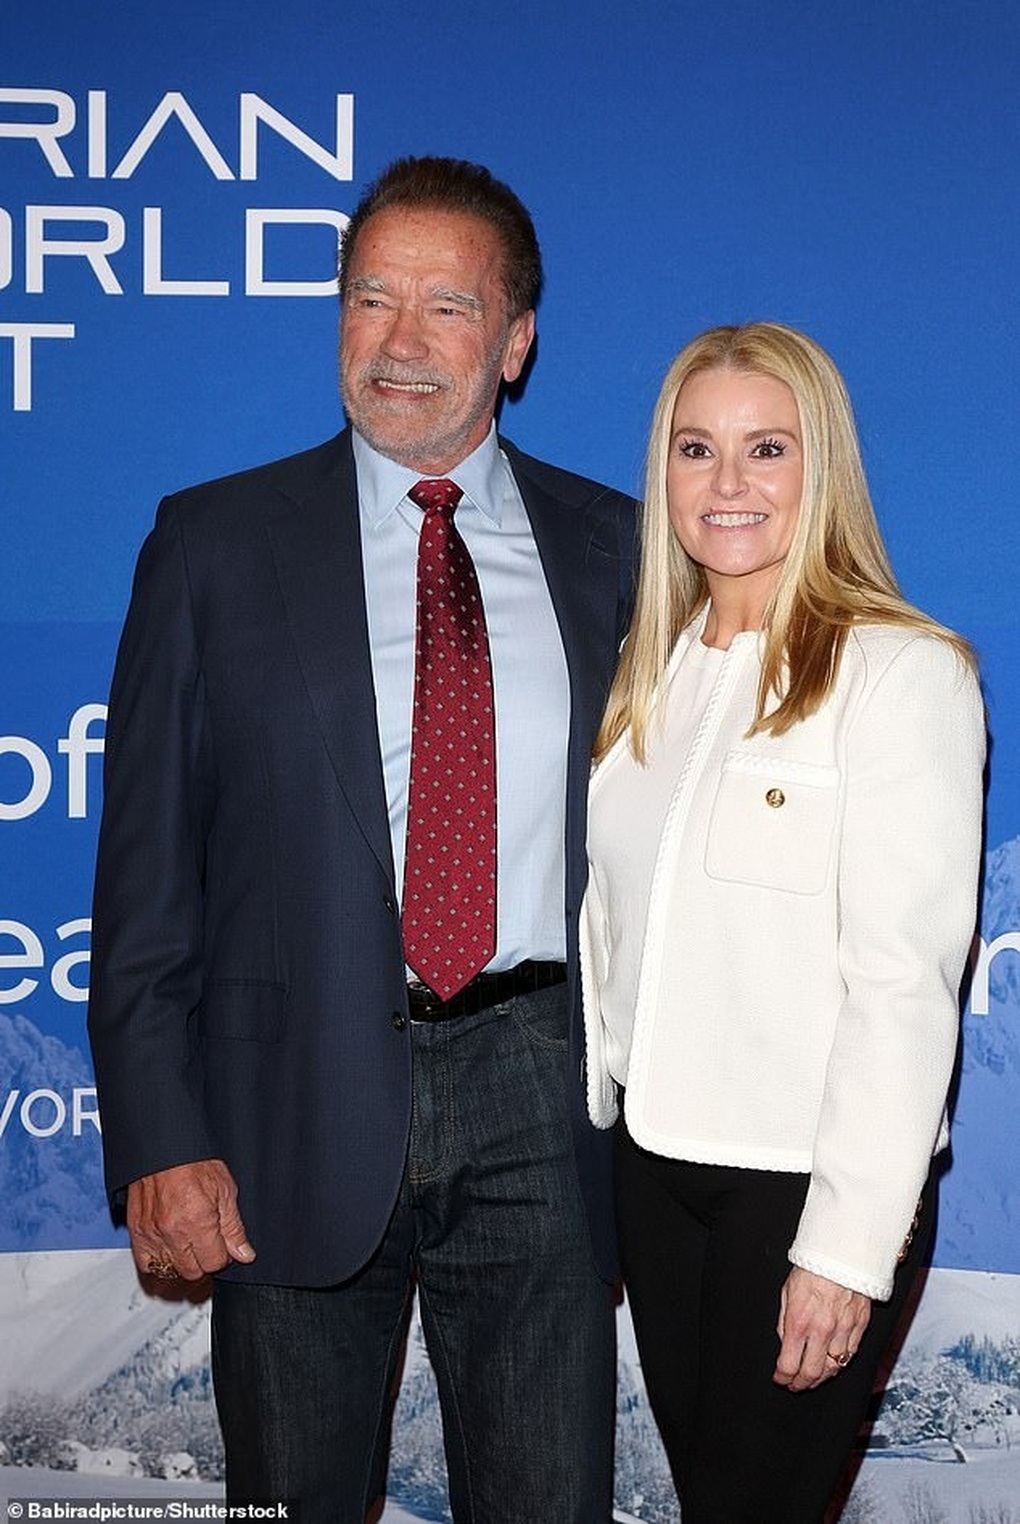 Even though he cuckolded his wife, Arnold Schwarzenegger affirmed that he would love his wife all his life - 4